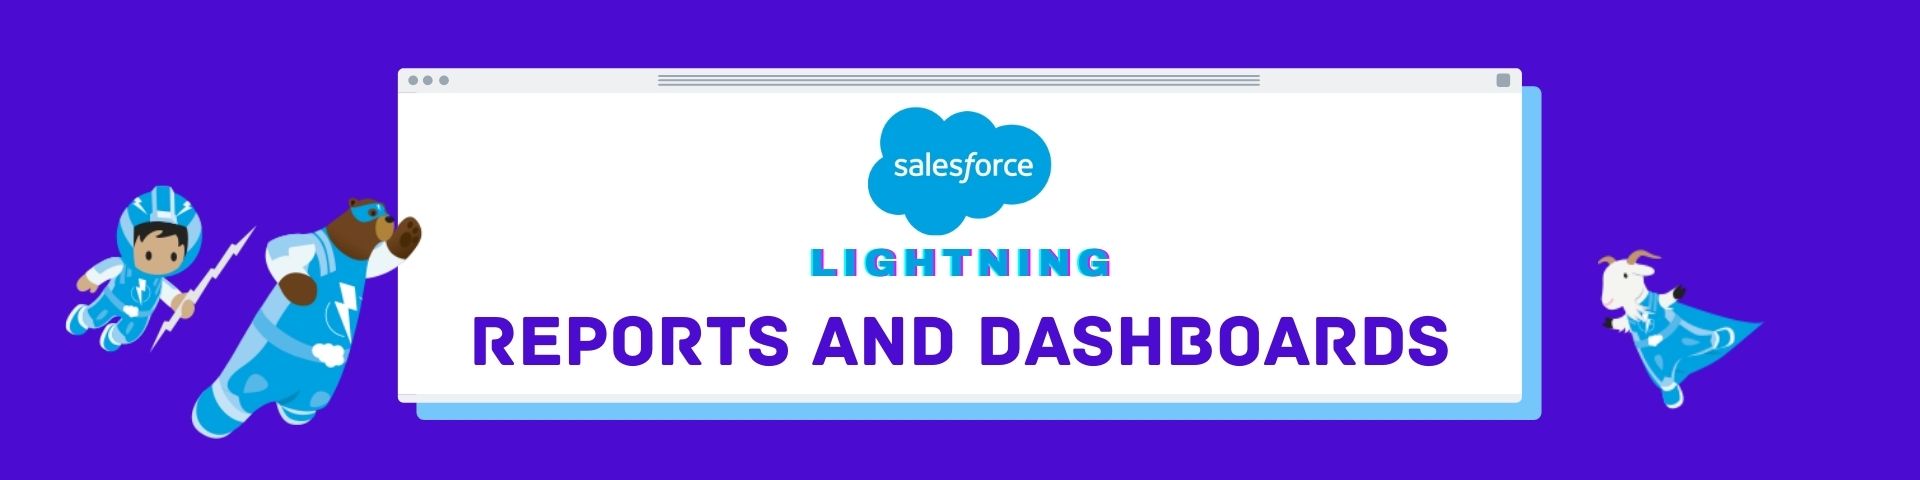 Salesforce Lightning Reports and dashboards